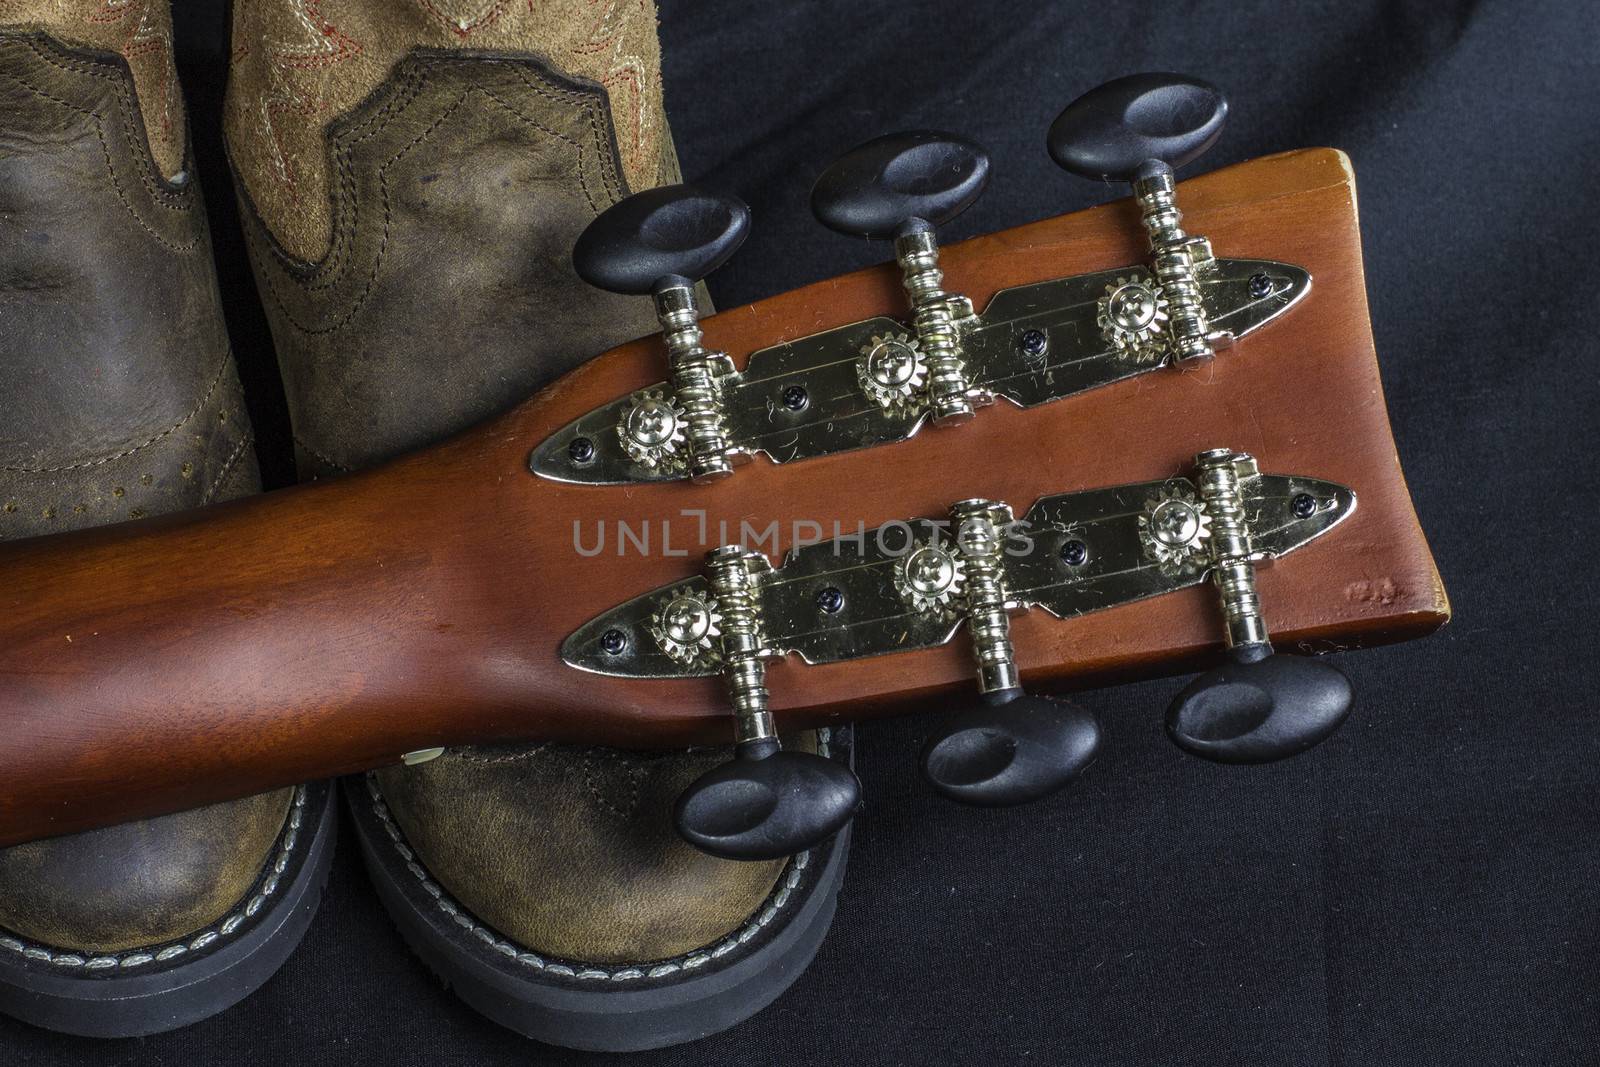 A close shot of a pair of boots and a cowboy guitar handle.